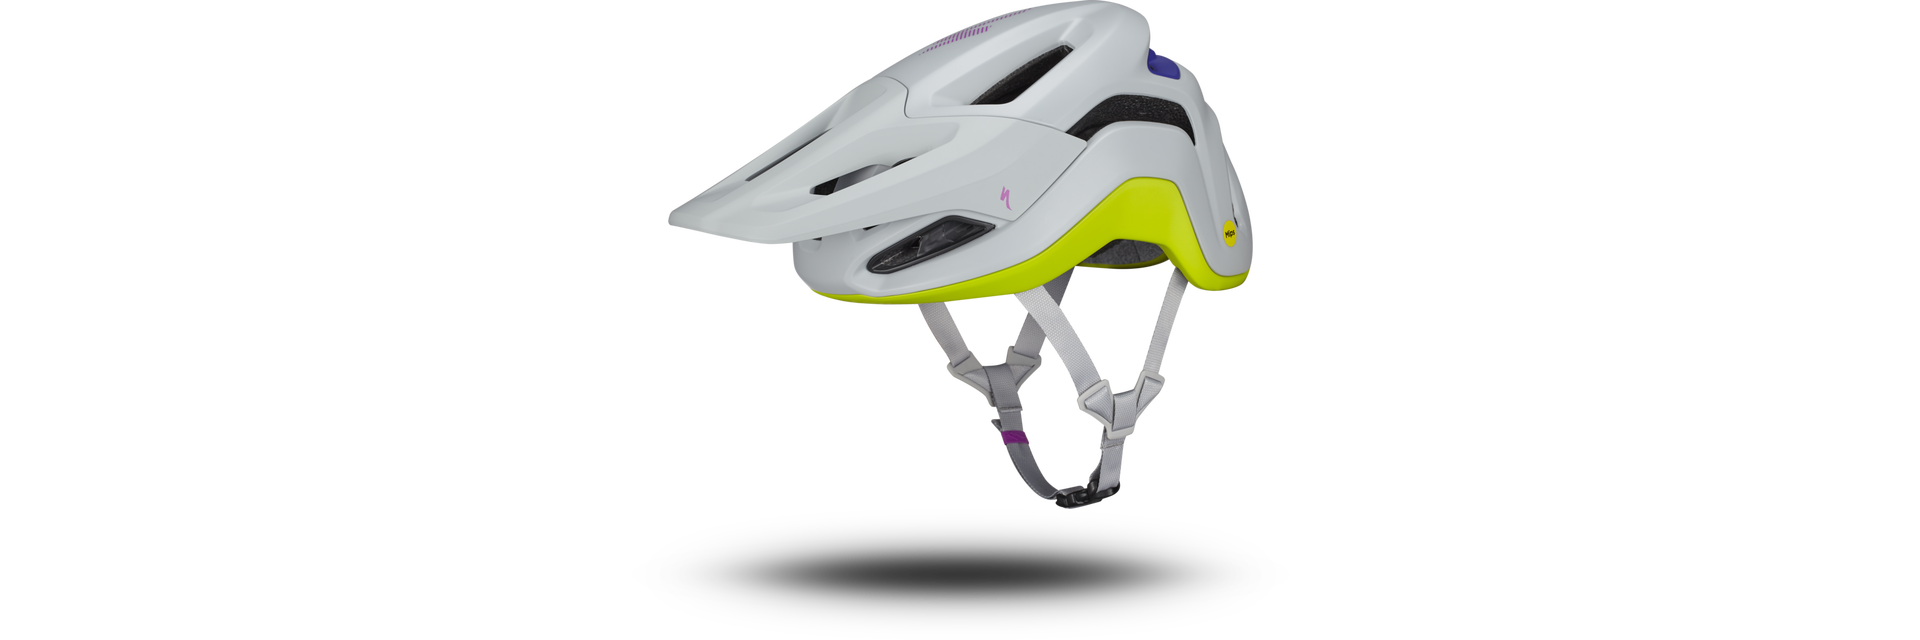 Specialized Ambush 2 Helmet - 701 Cycle and Sport